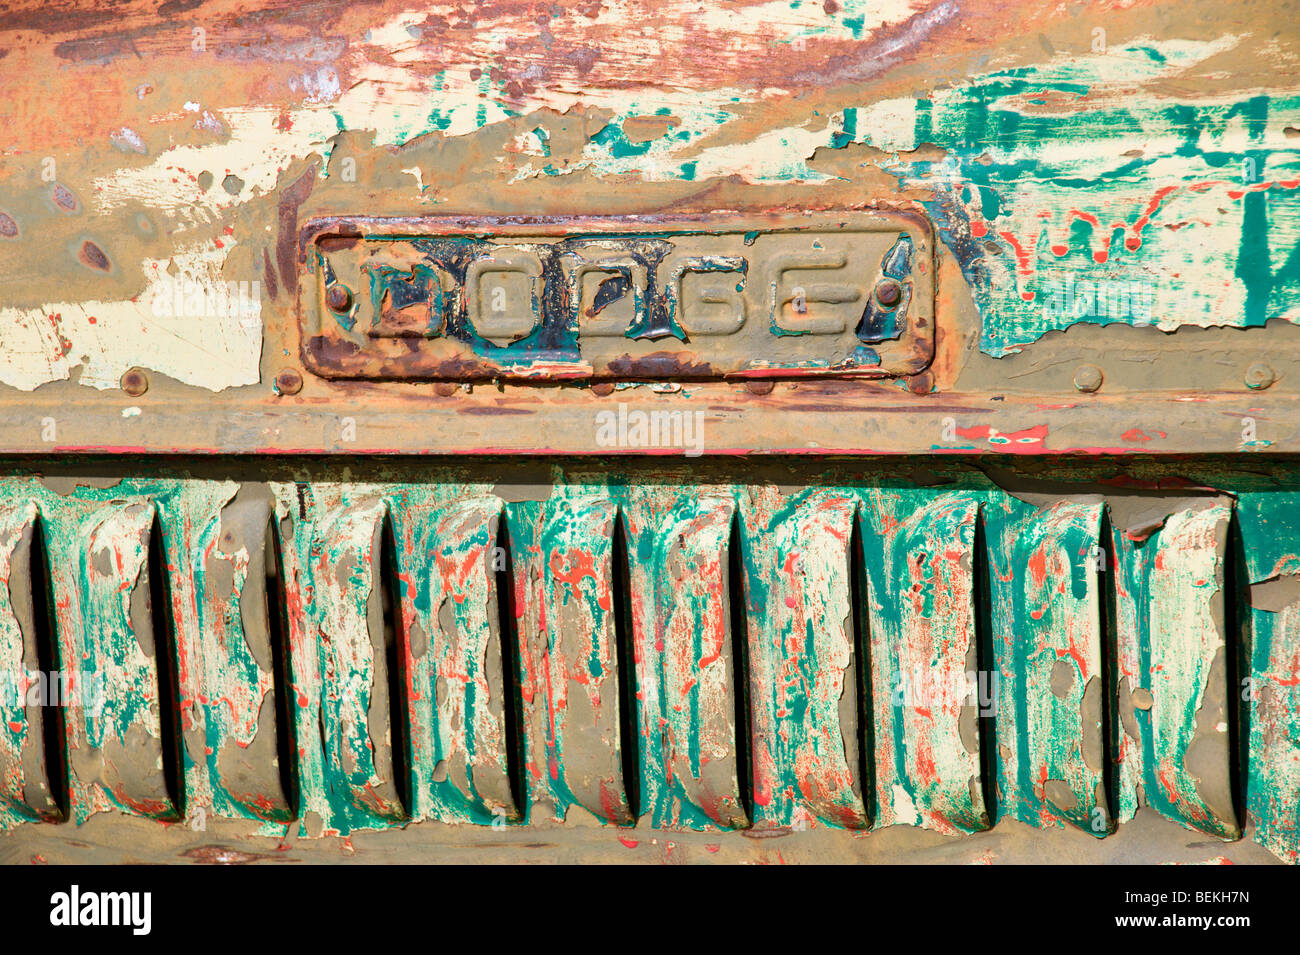 Close-up and detail of an old Dodge truck hood revealing many layers of paint, in the gold mining ghost town - Elizabethtown, NM Stock Photo